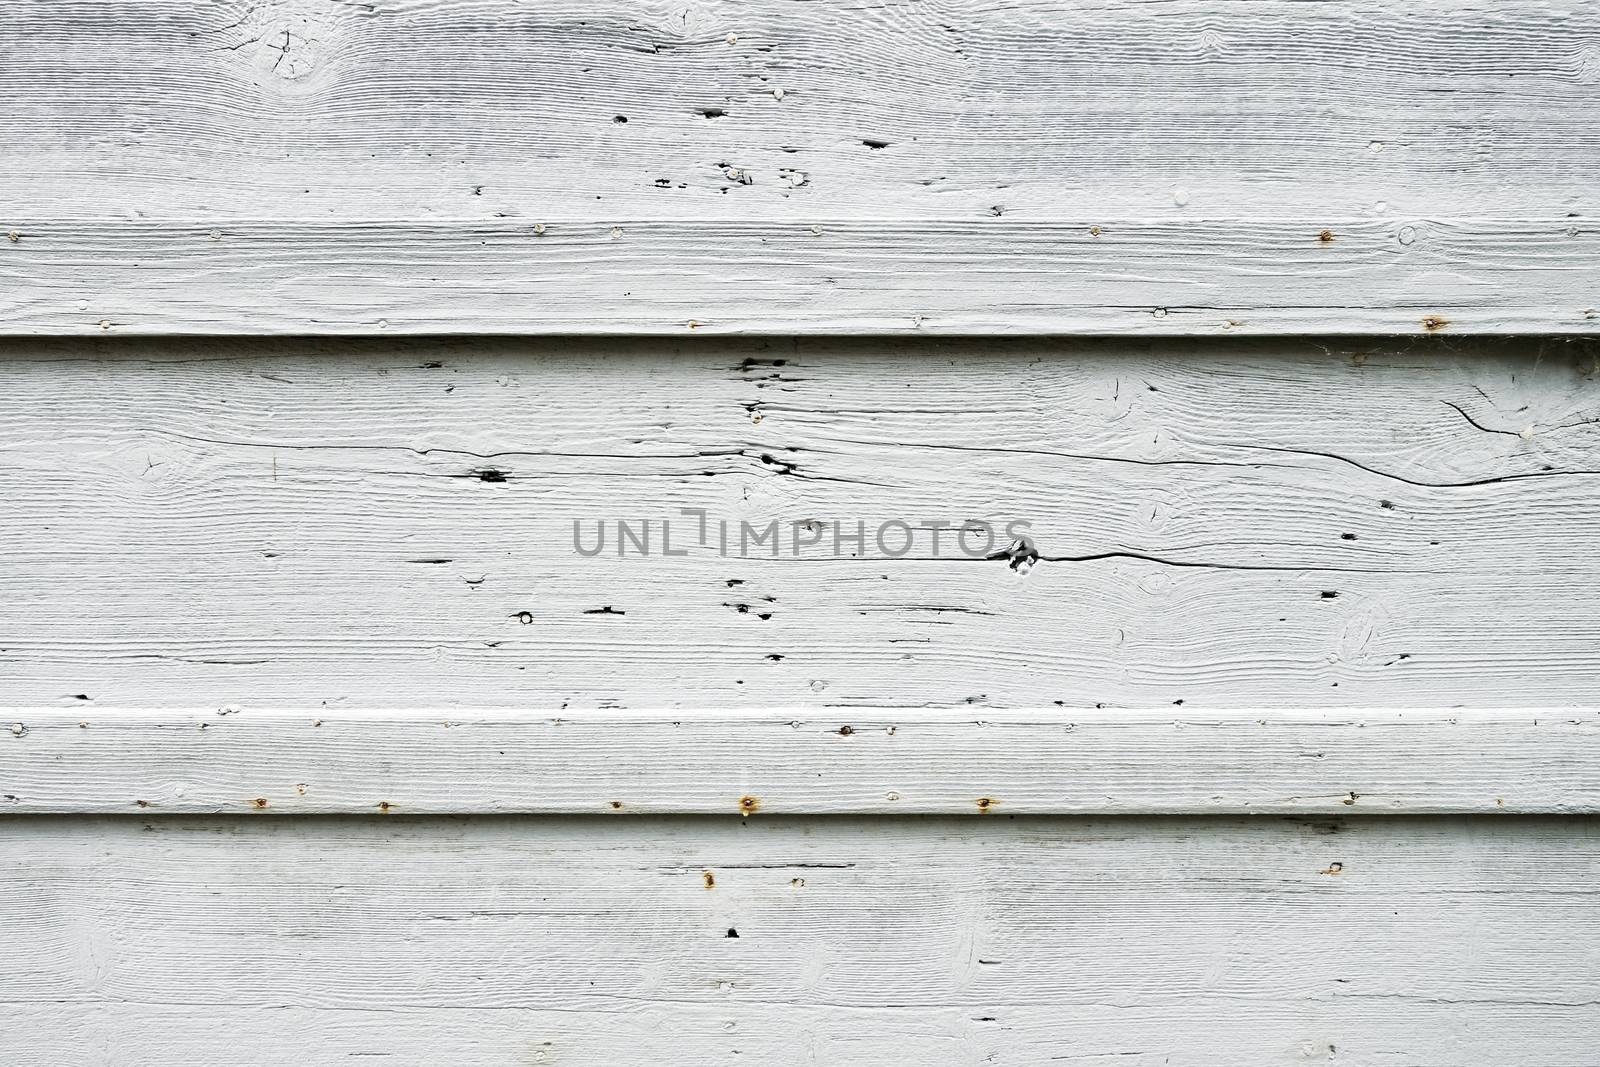 Old rough wood board background texture